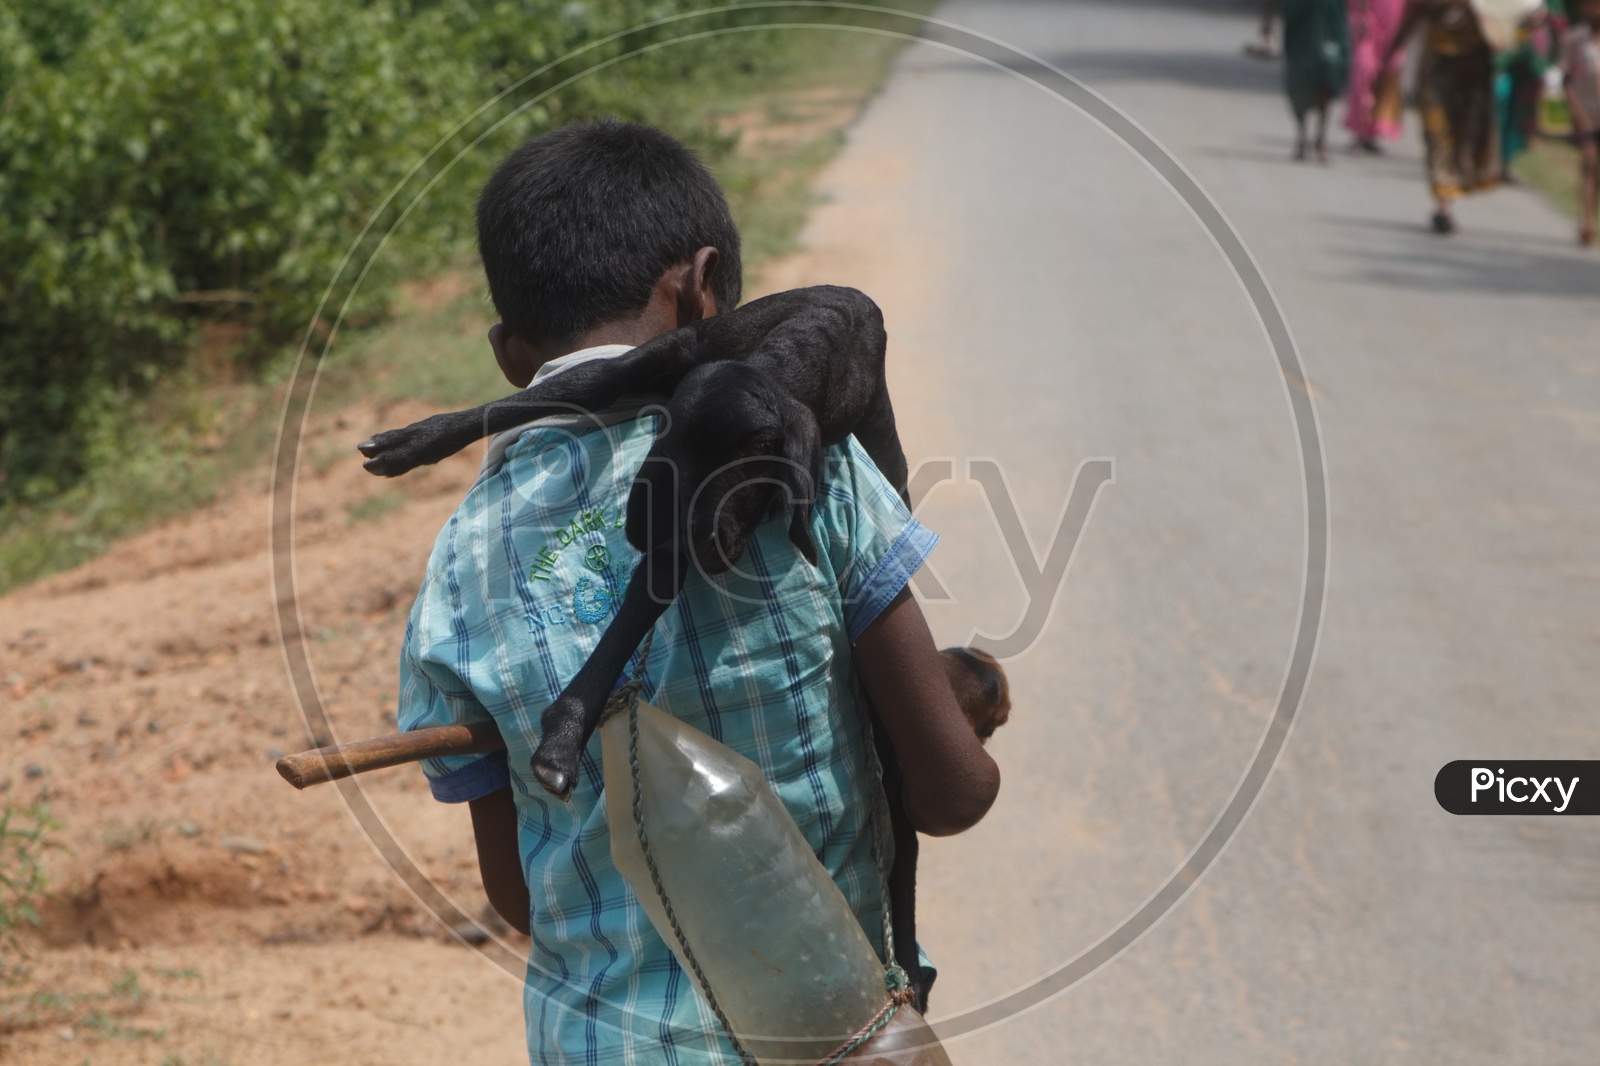 A Boy carrying a baby goat on his shoulder.